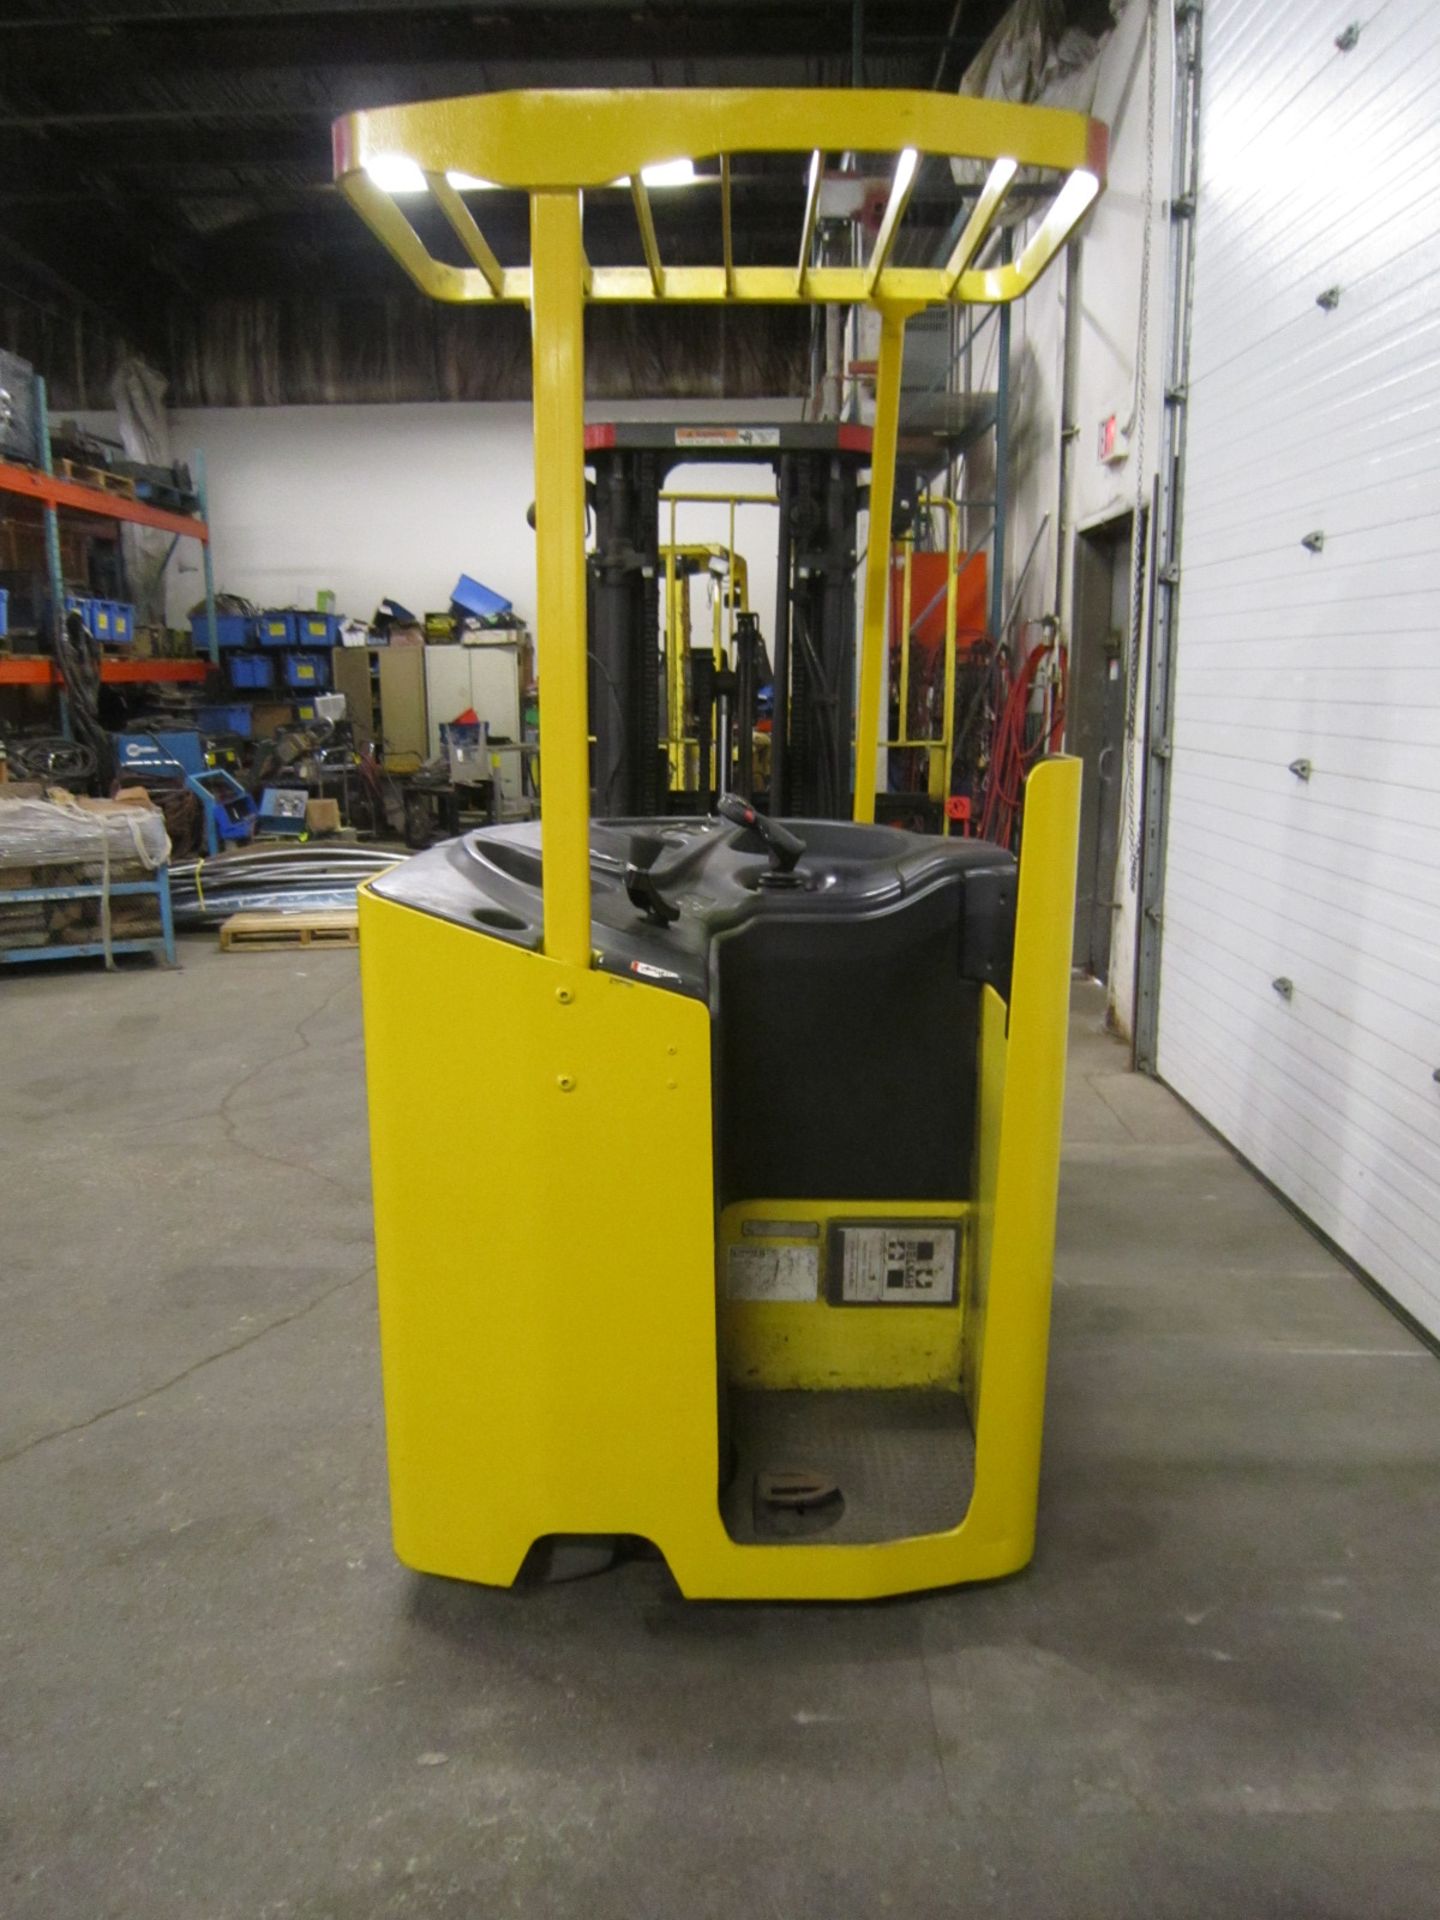 2003 Hyster model E30HSD 3000lbs Capacity Electric Rideon Lift Truck Stand-On Forklift with 3- - Image 2 of 3